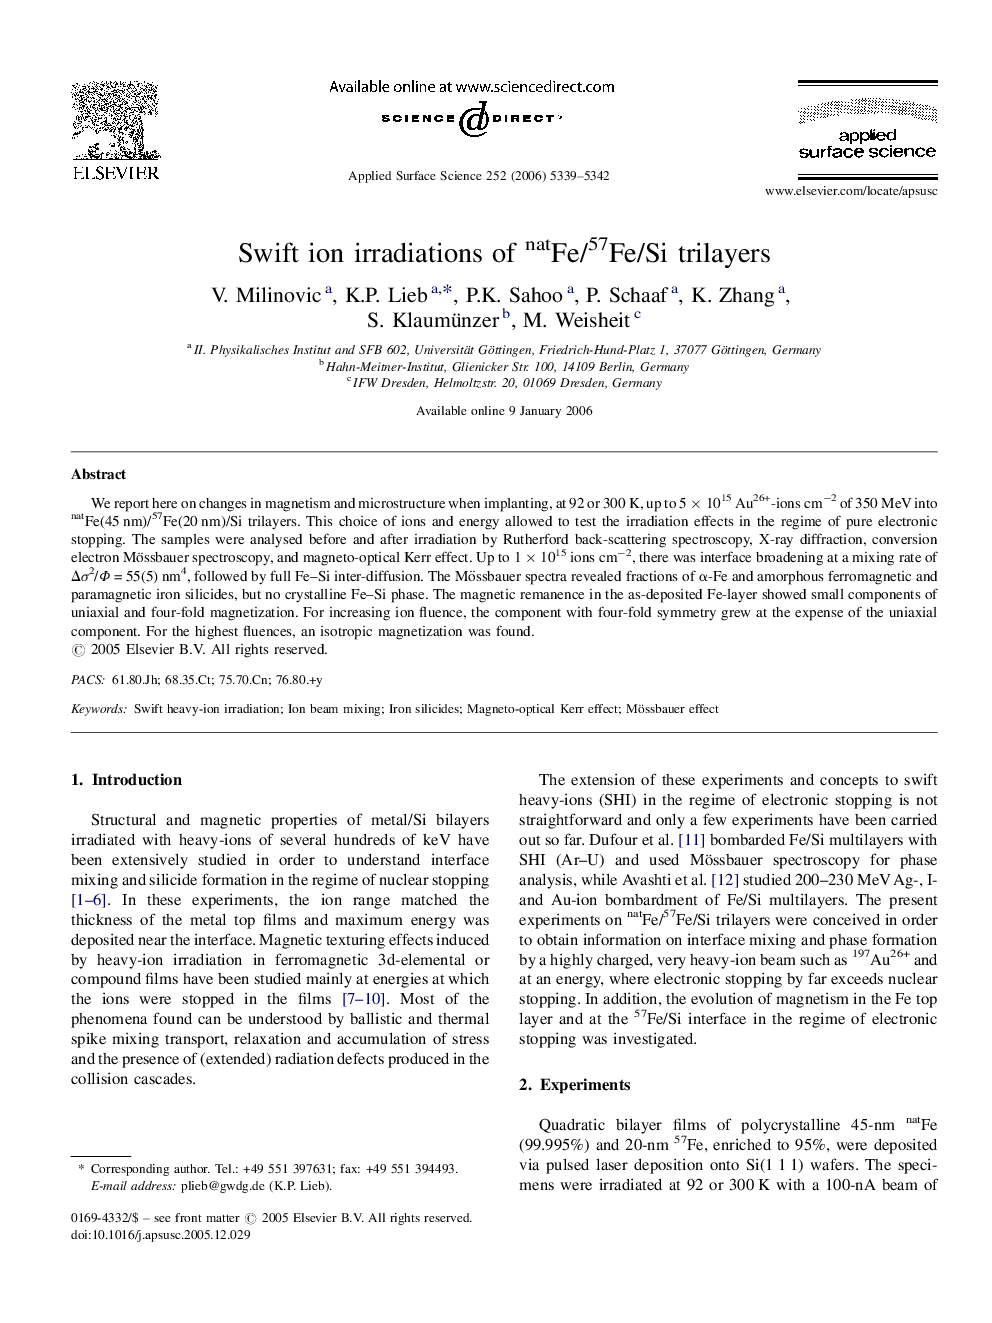 Swift ion irradiations of natFe/57Fe/Si trilayers